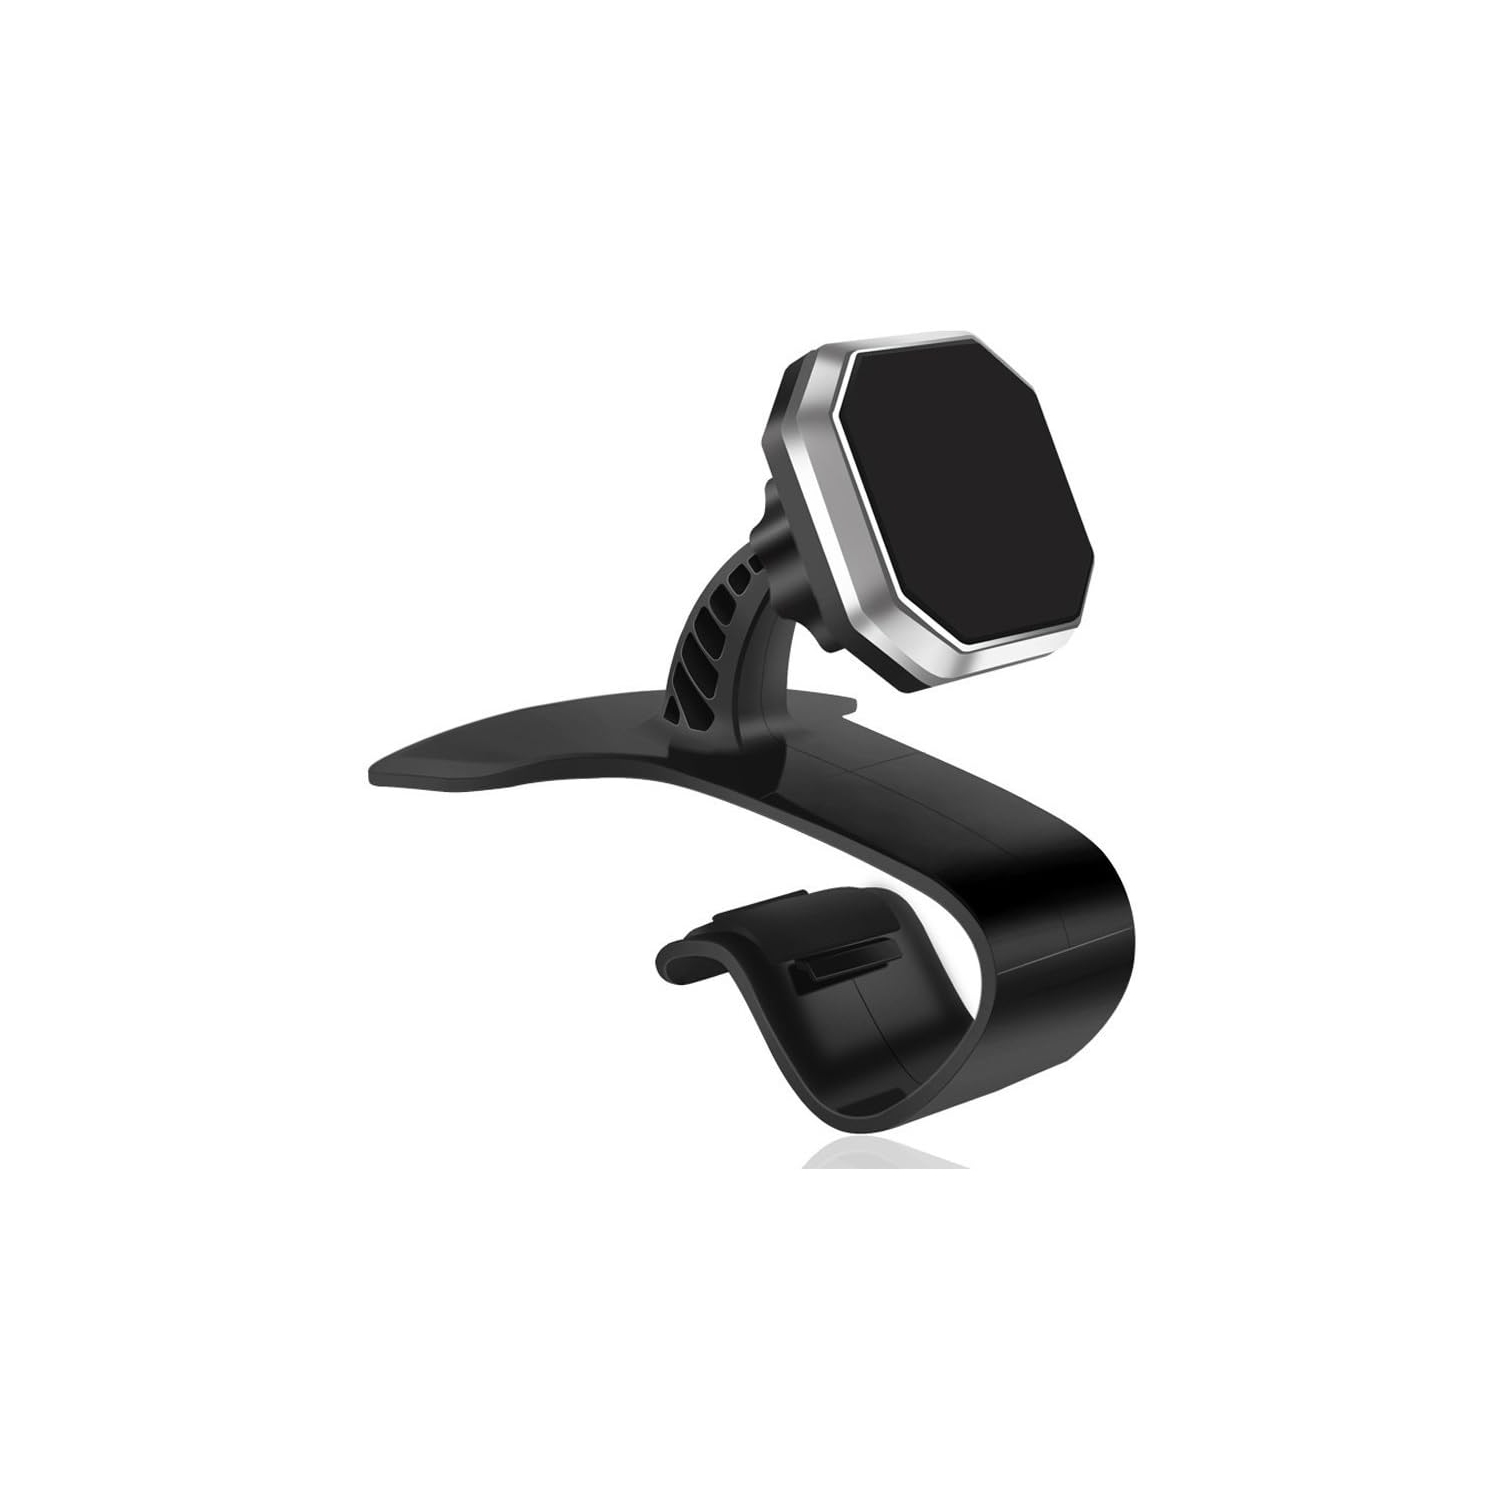 Navor Universal Car Phone Mount Holder for Vent Windshield Dashboard for Smartphones Including iPhone 7,7P, 6, 6S, Galaxy S7, S7 Edge-Sliver